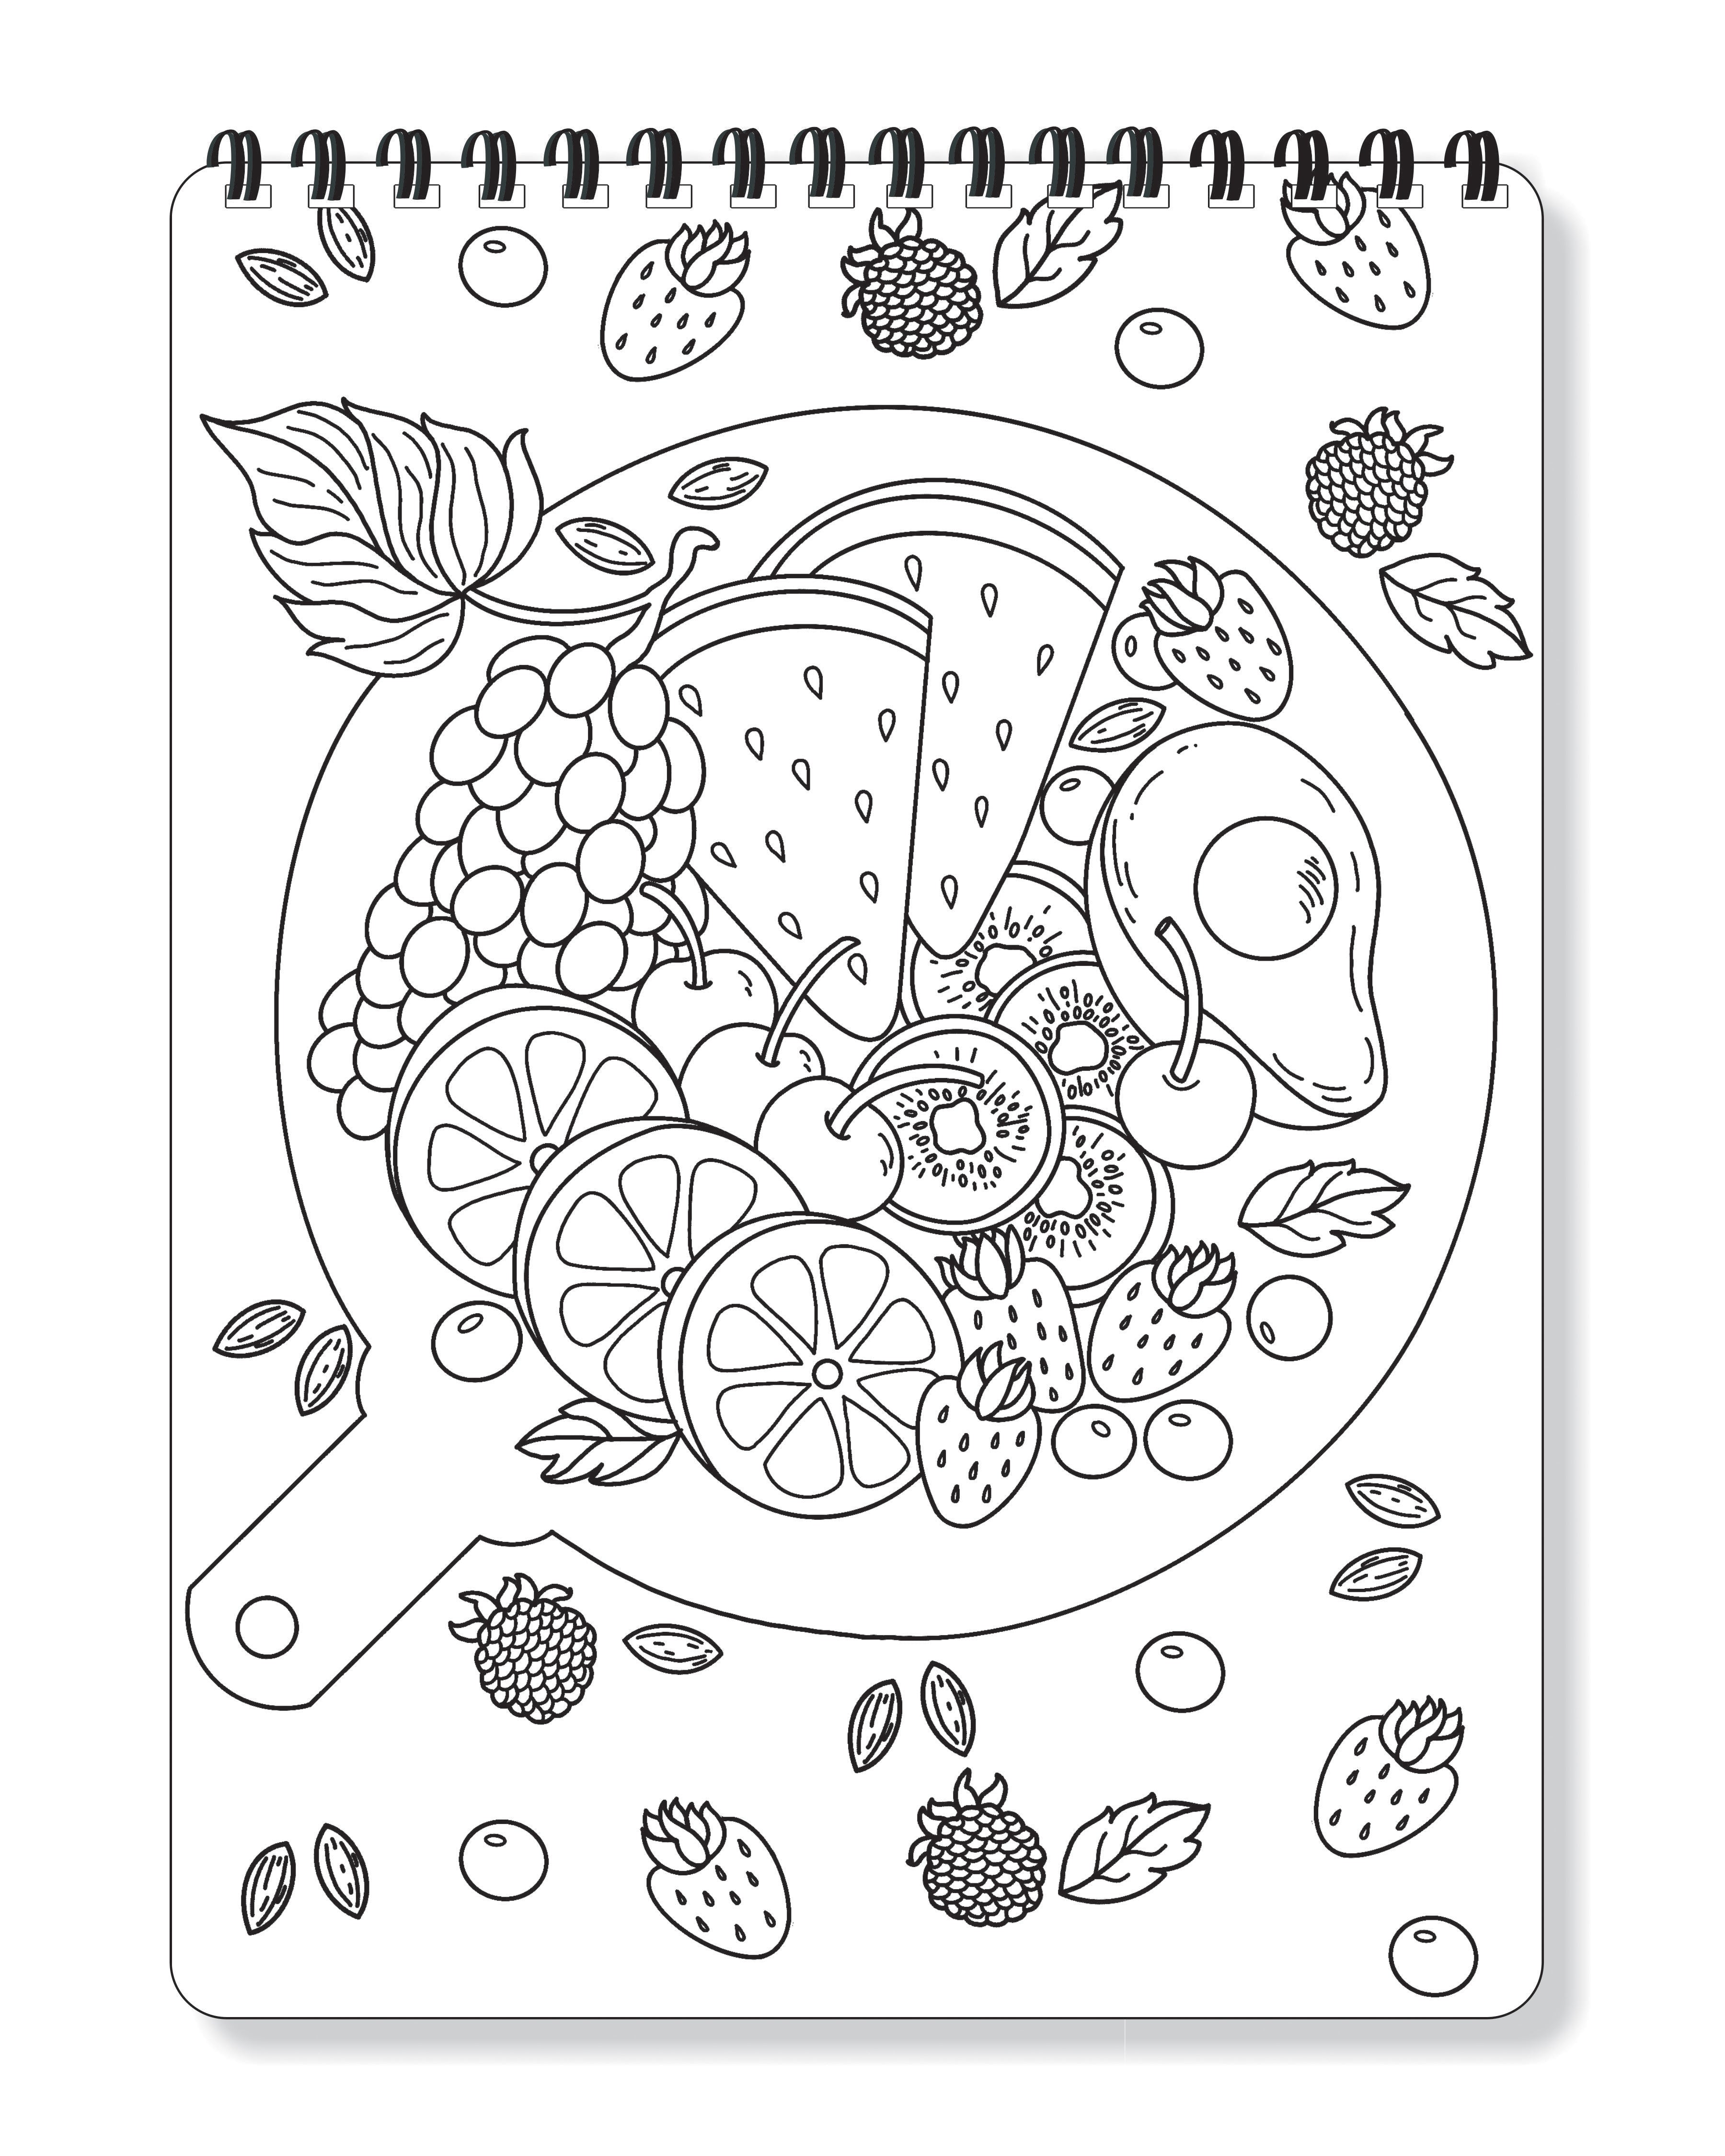 Coloring Pages | Fruit And Vegetable Coloring Pages